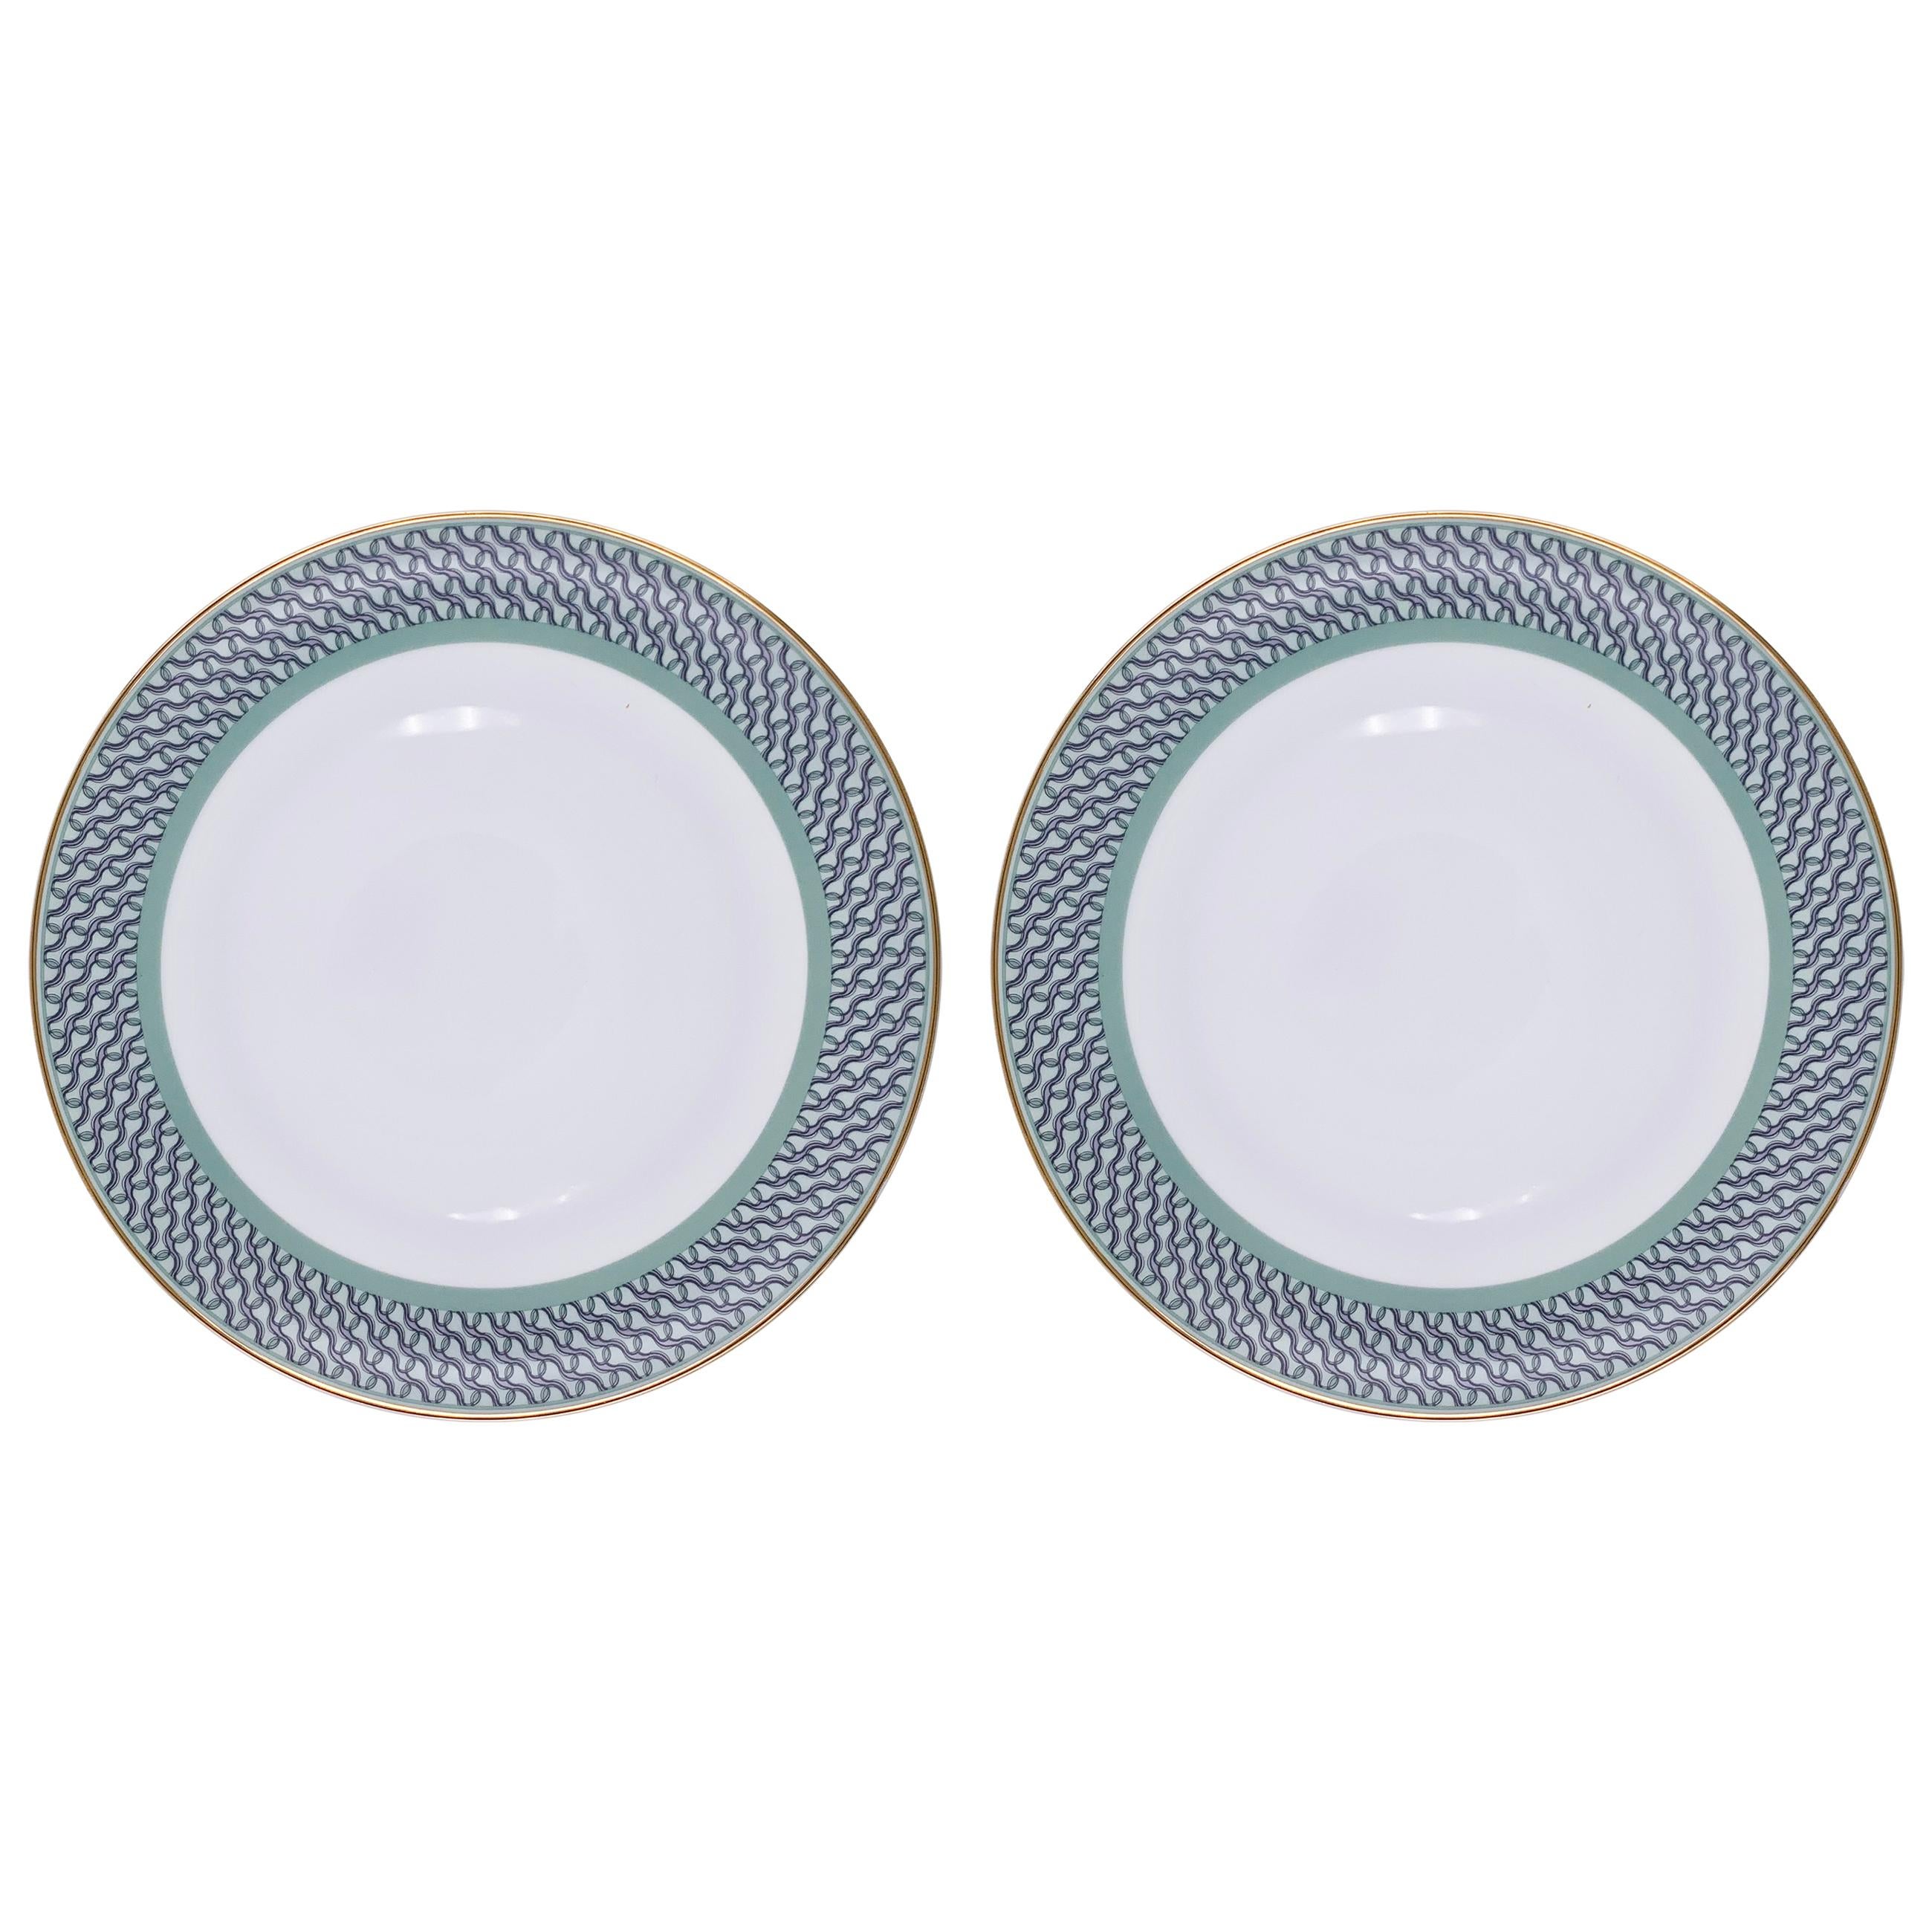 Set of 2 Dinner Plate Ring Mid Century Rhythm André Fu Living Tableware New For Sale